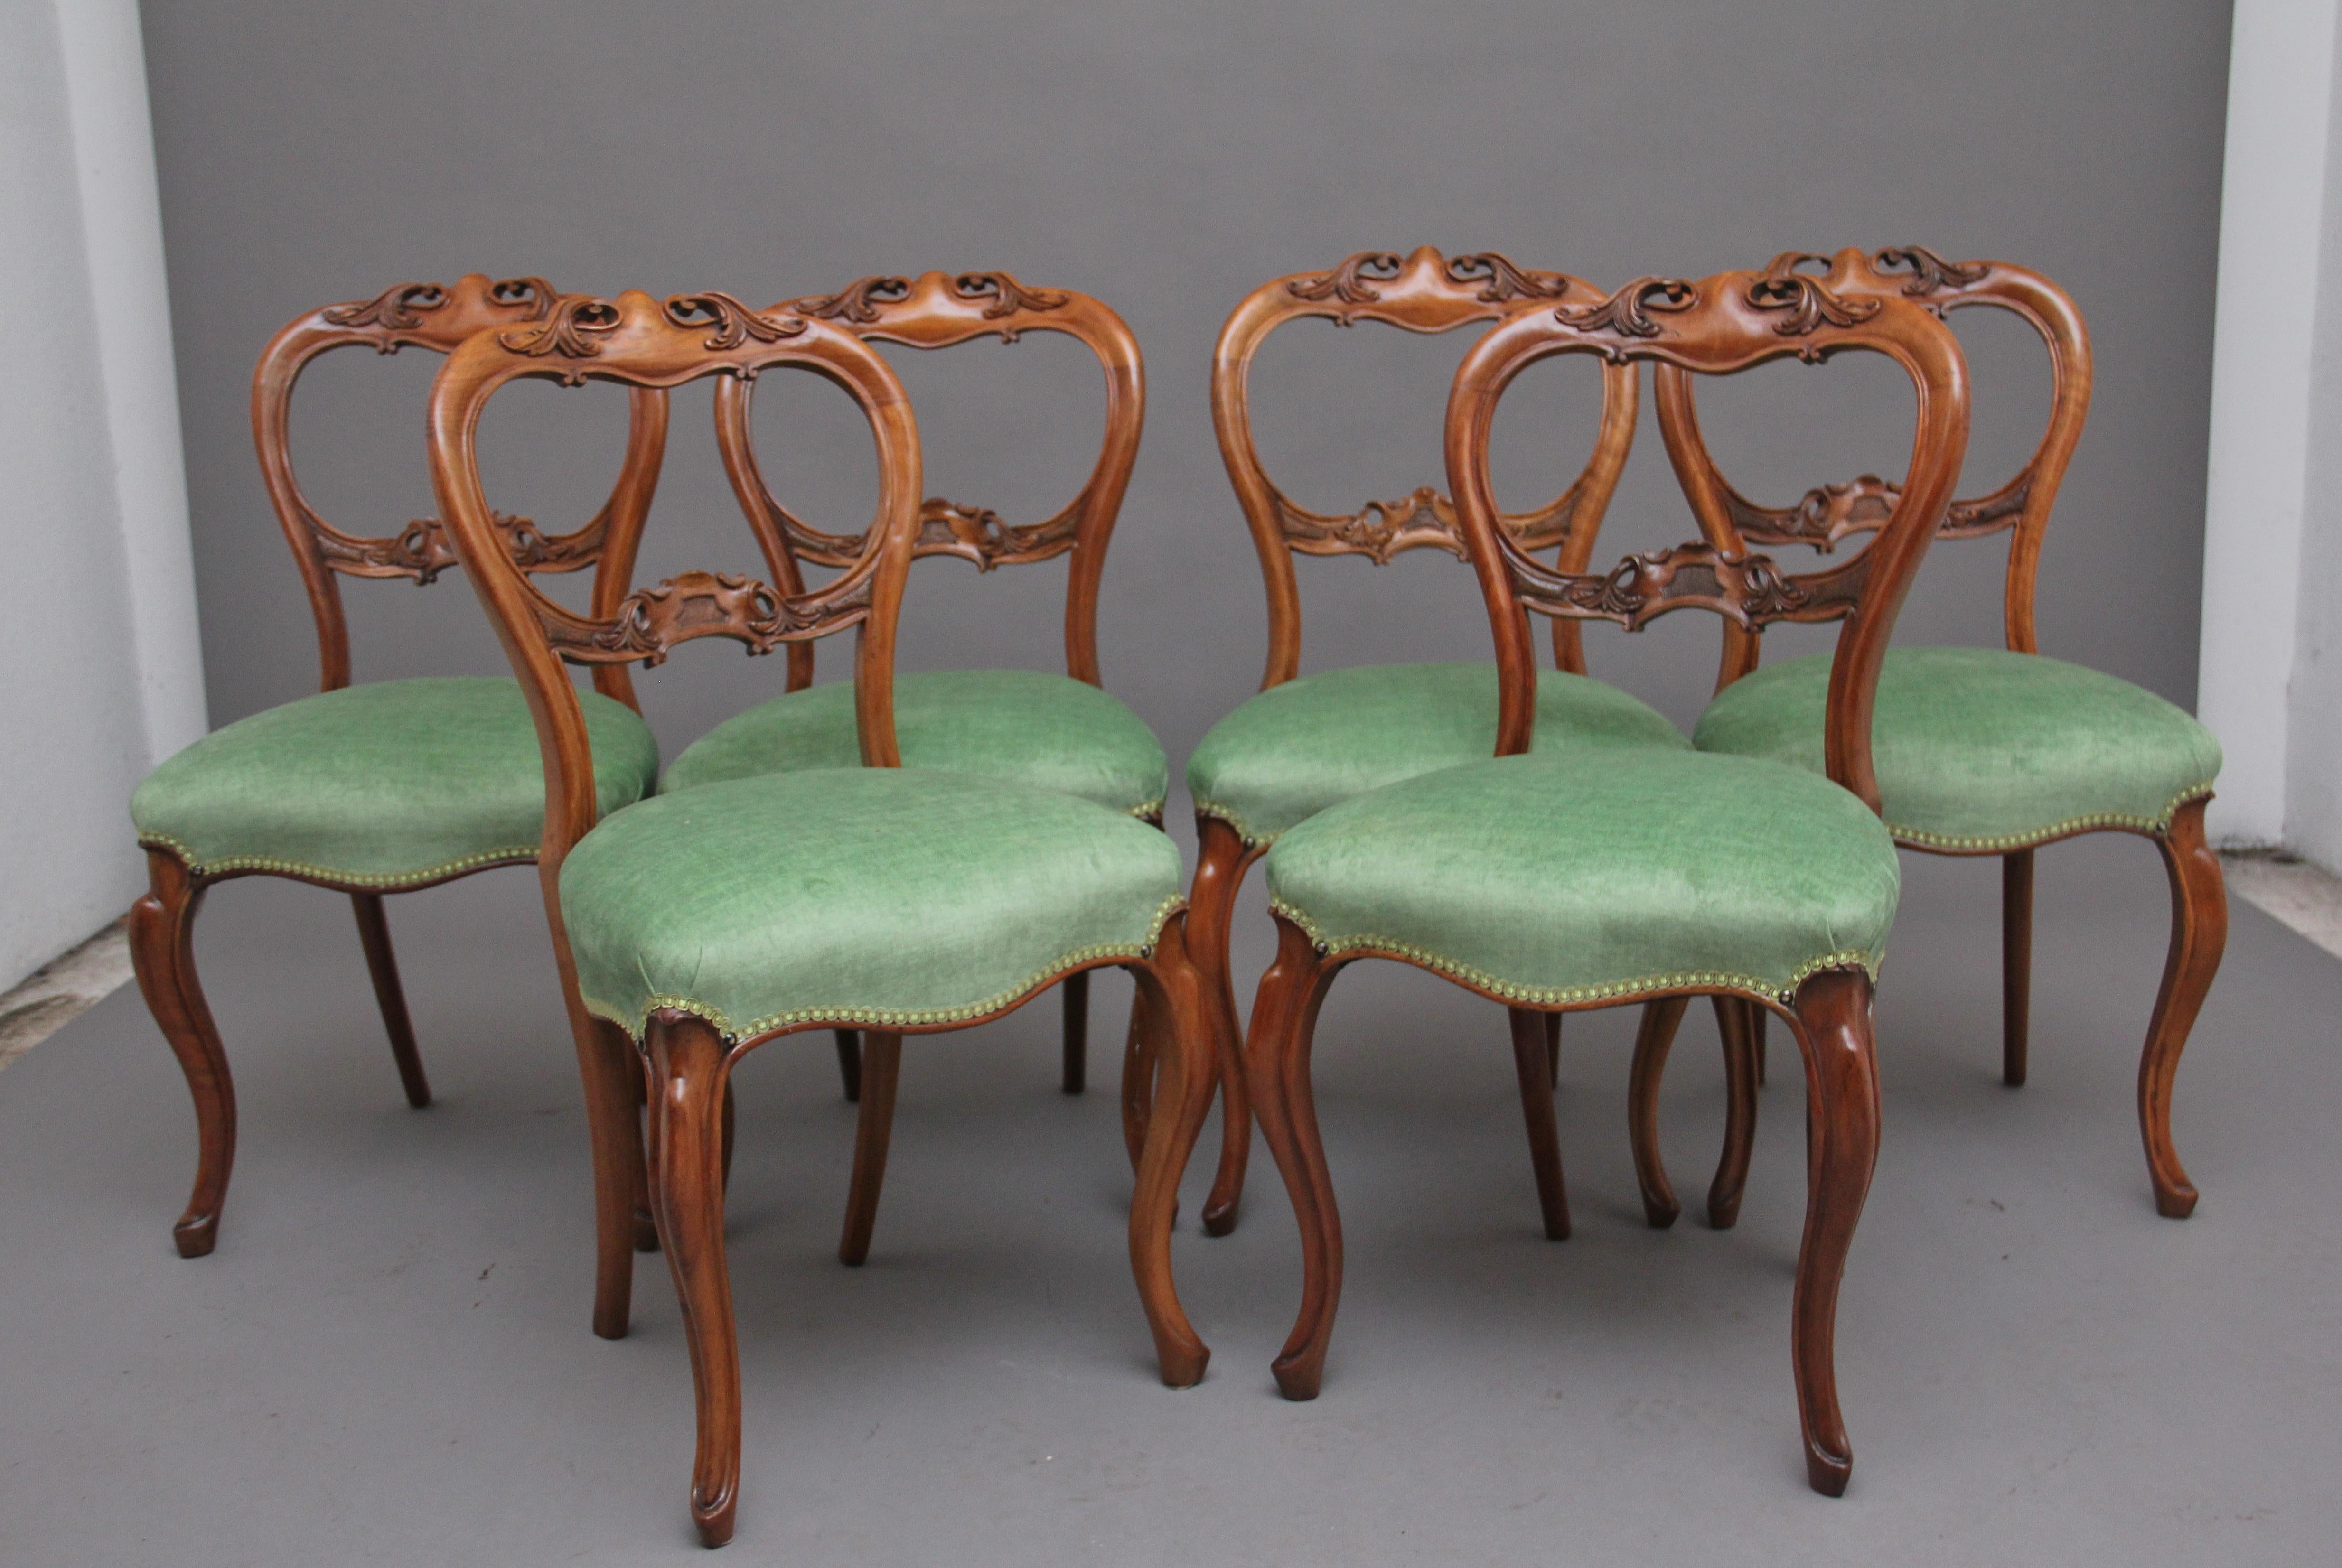 A fine quality set of six 19th century carved walnut dining chairs having a decorative carved top rail and shaped centre splat which is also beautifully carved and pierced, newly reupholstered stuffover seat in a green fabric supported on elegant